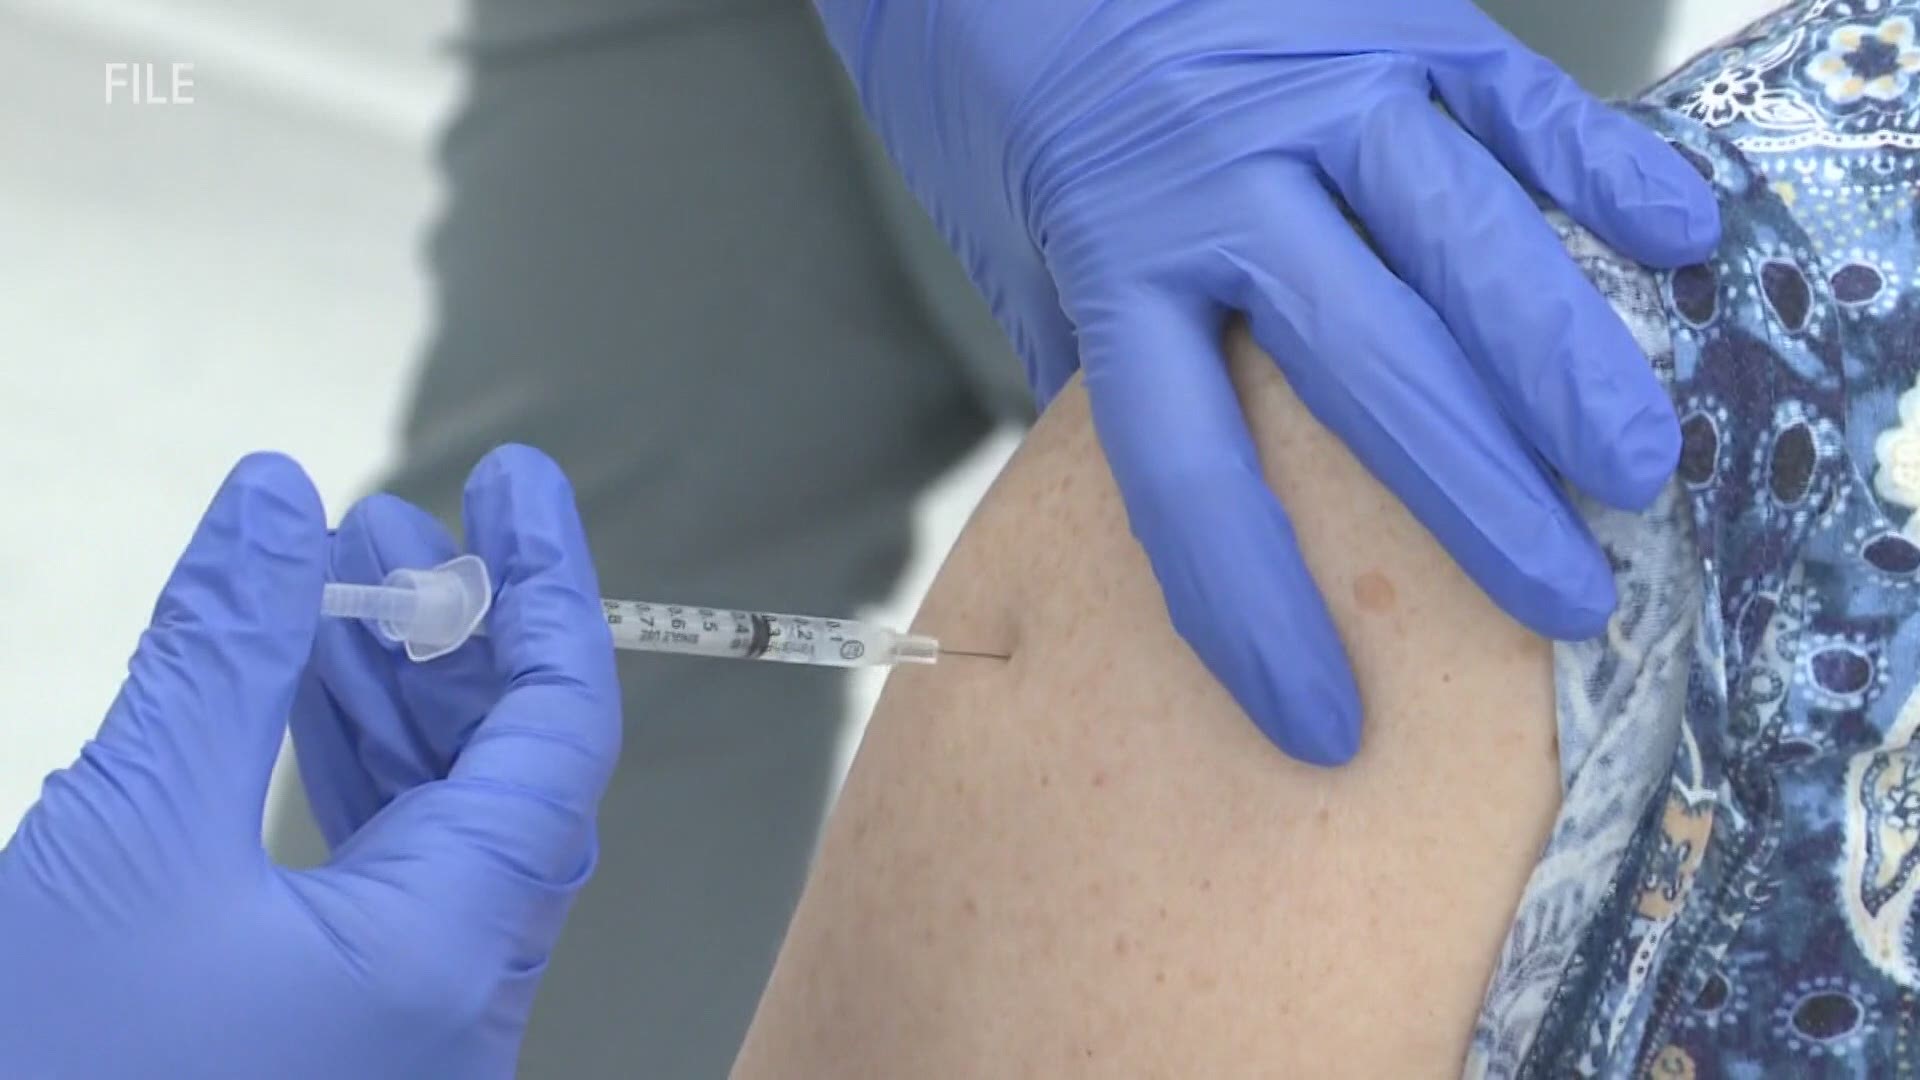 Up until now, 22 states have offered vaccines to anyone 16 and older. Today, Michigan is among several states to join them.